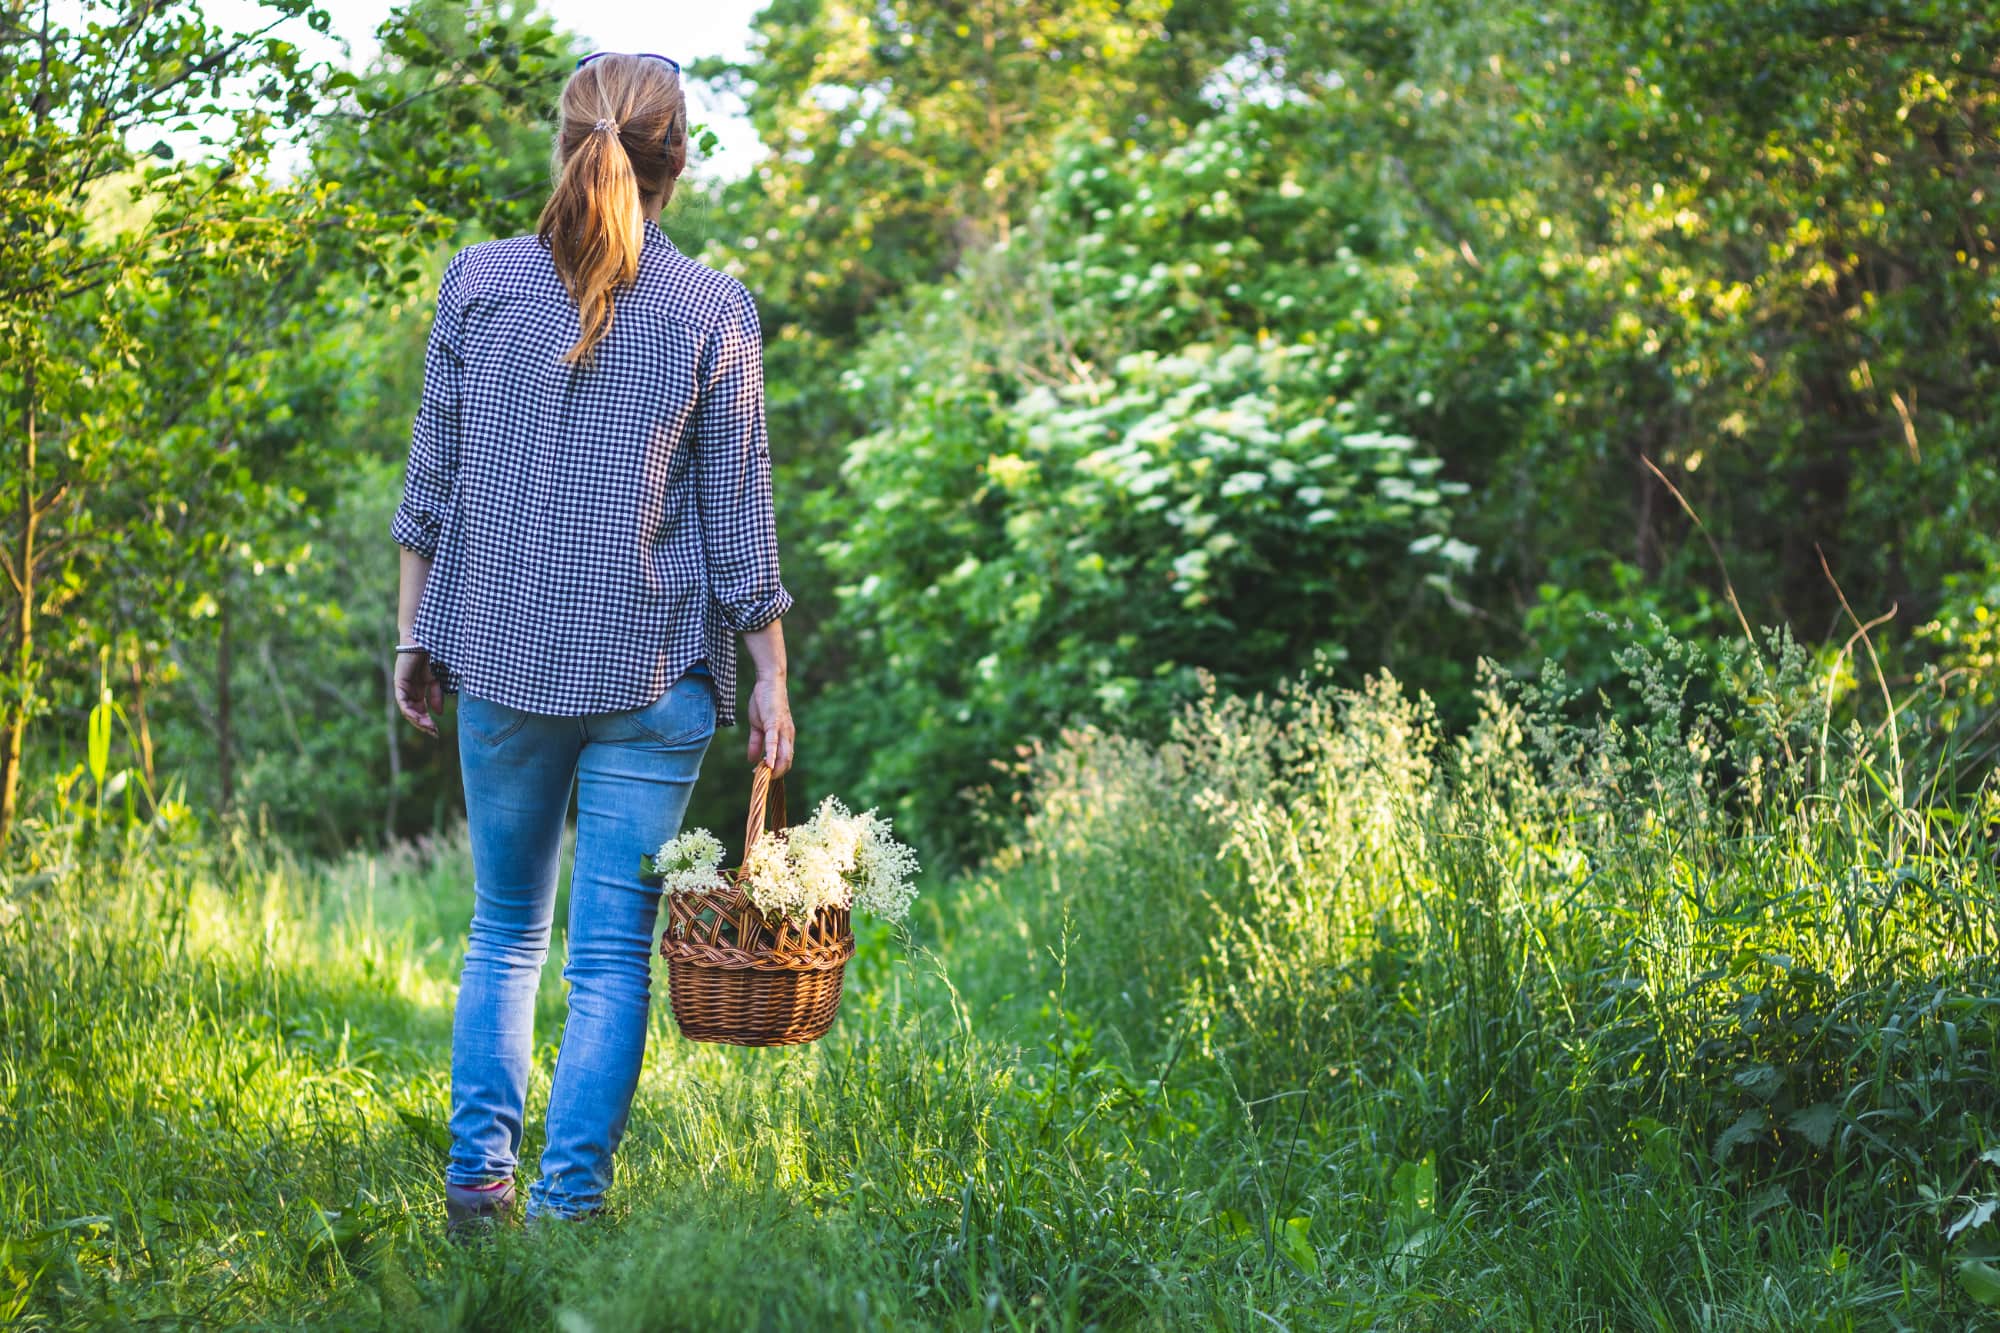 Woman in blue shirt walking in tall grass, collecting healing herbs